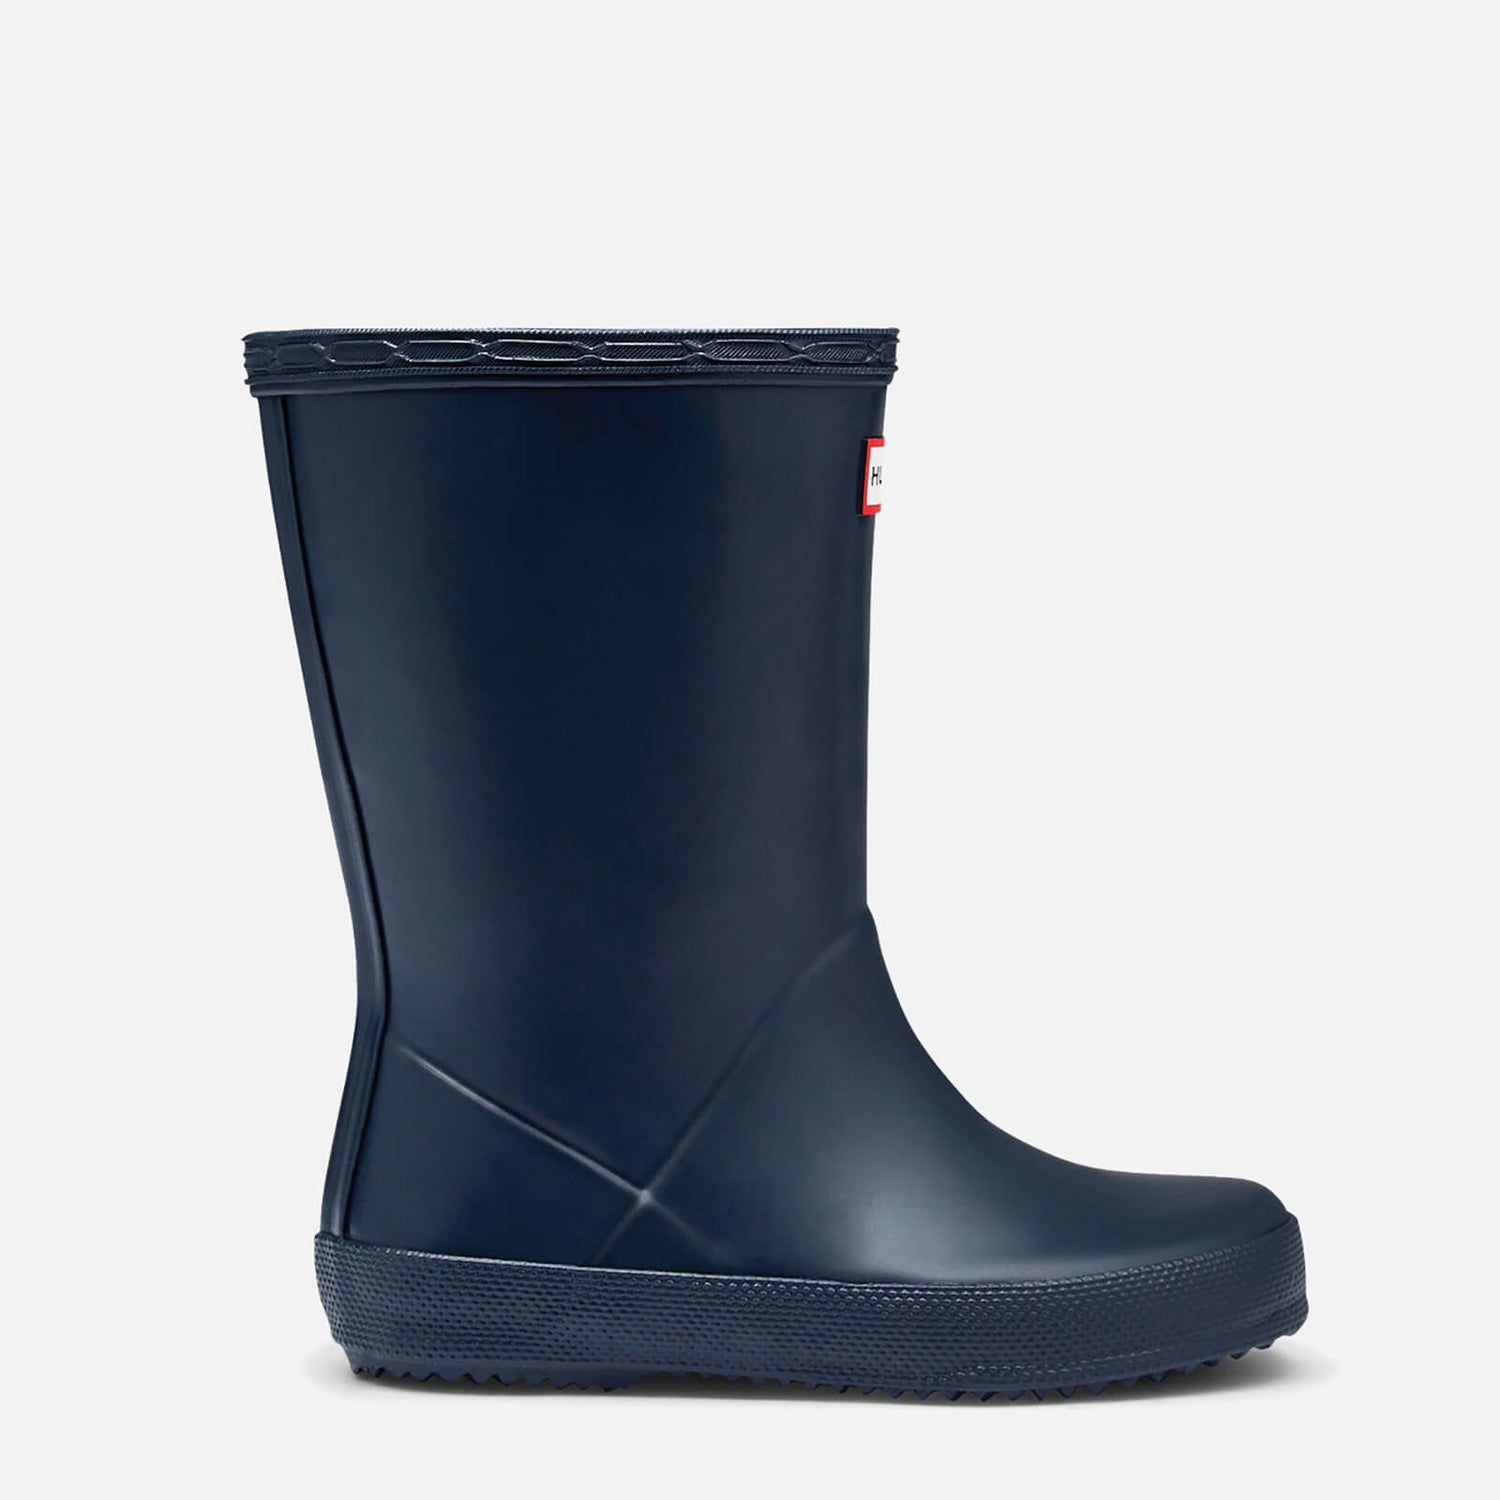 Hunter Kids' First Classic Wellington Boots - Navy - UK 4 Baby